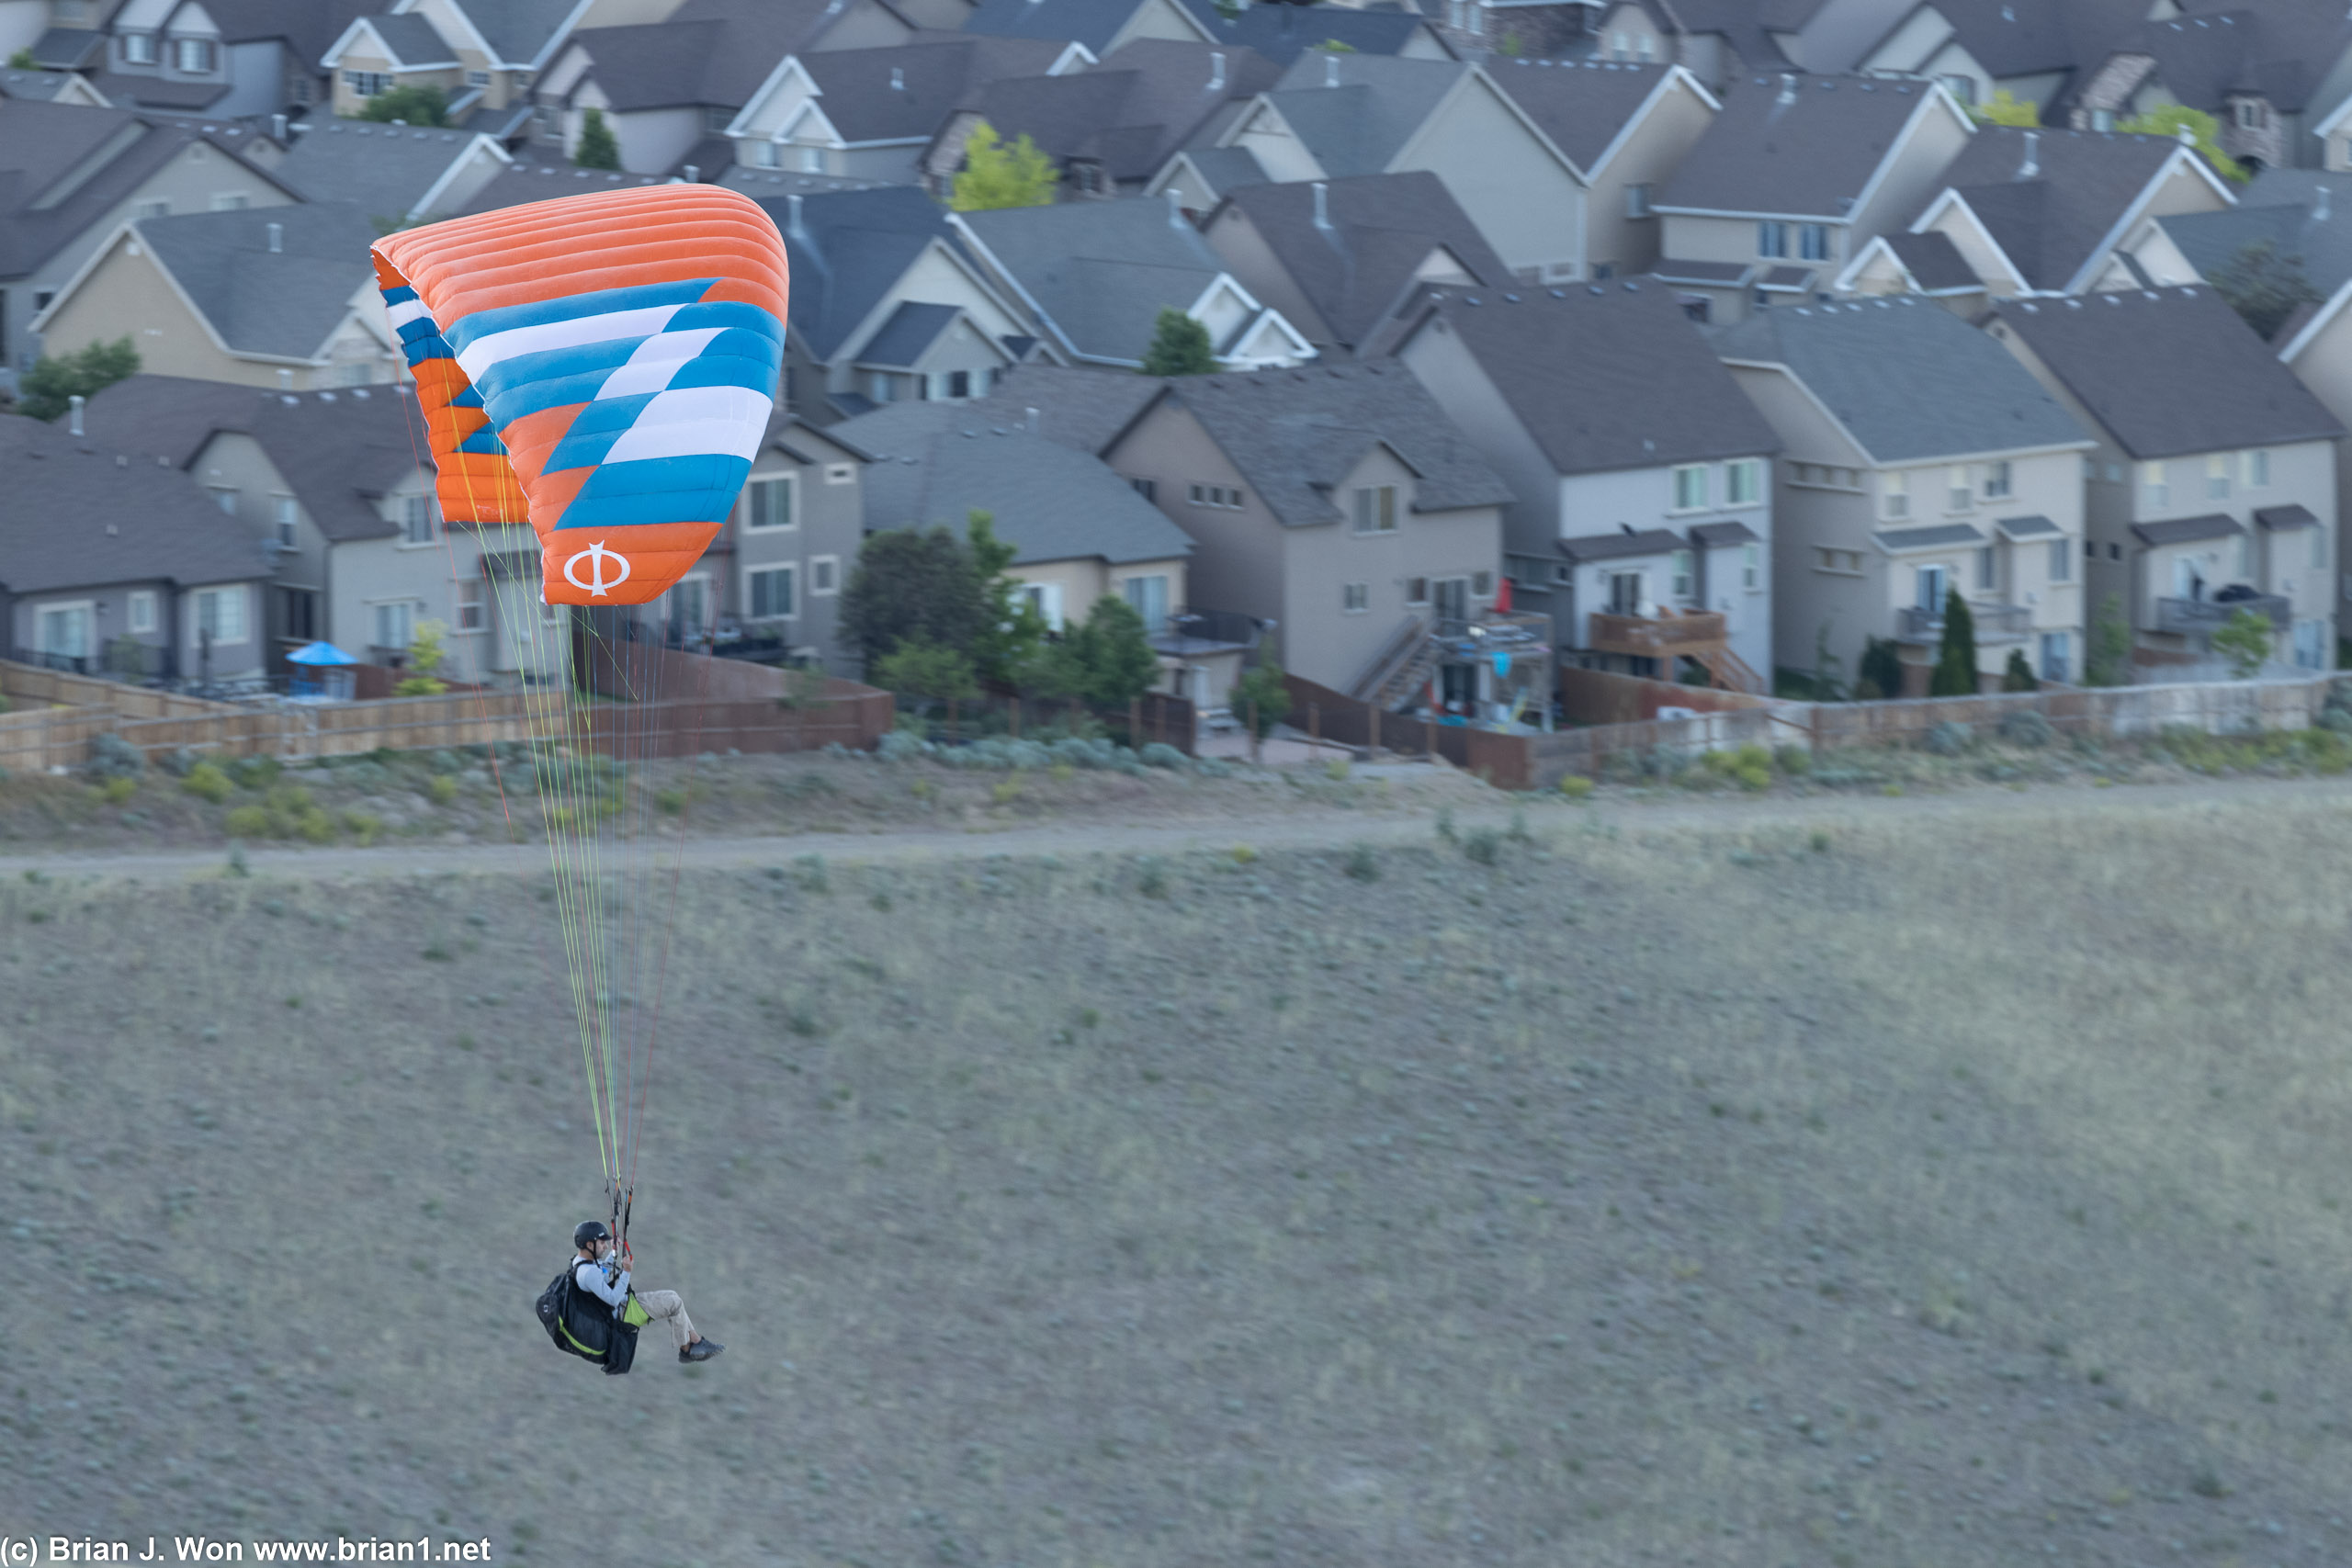 Paragliding is a thing in Salt Lake City.